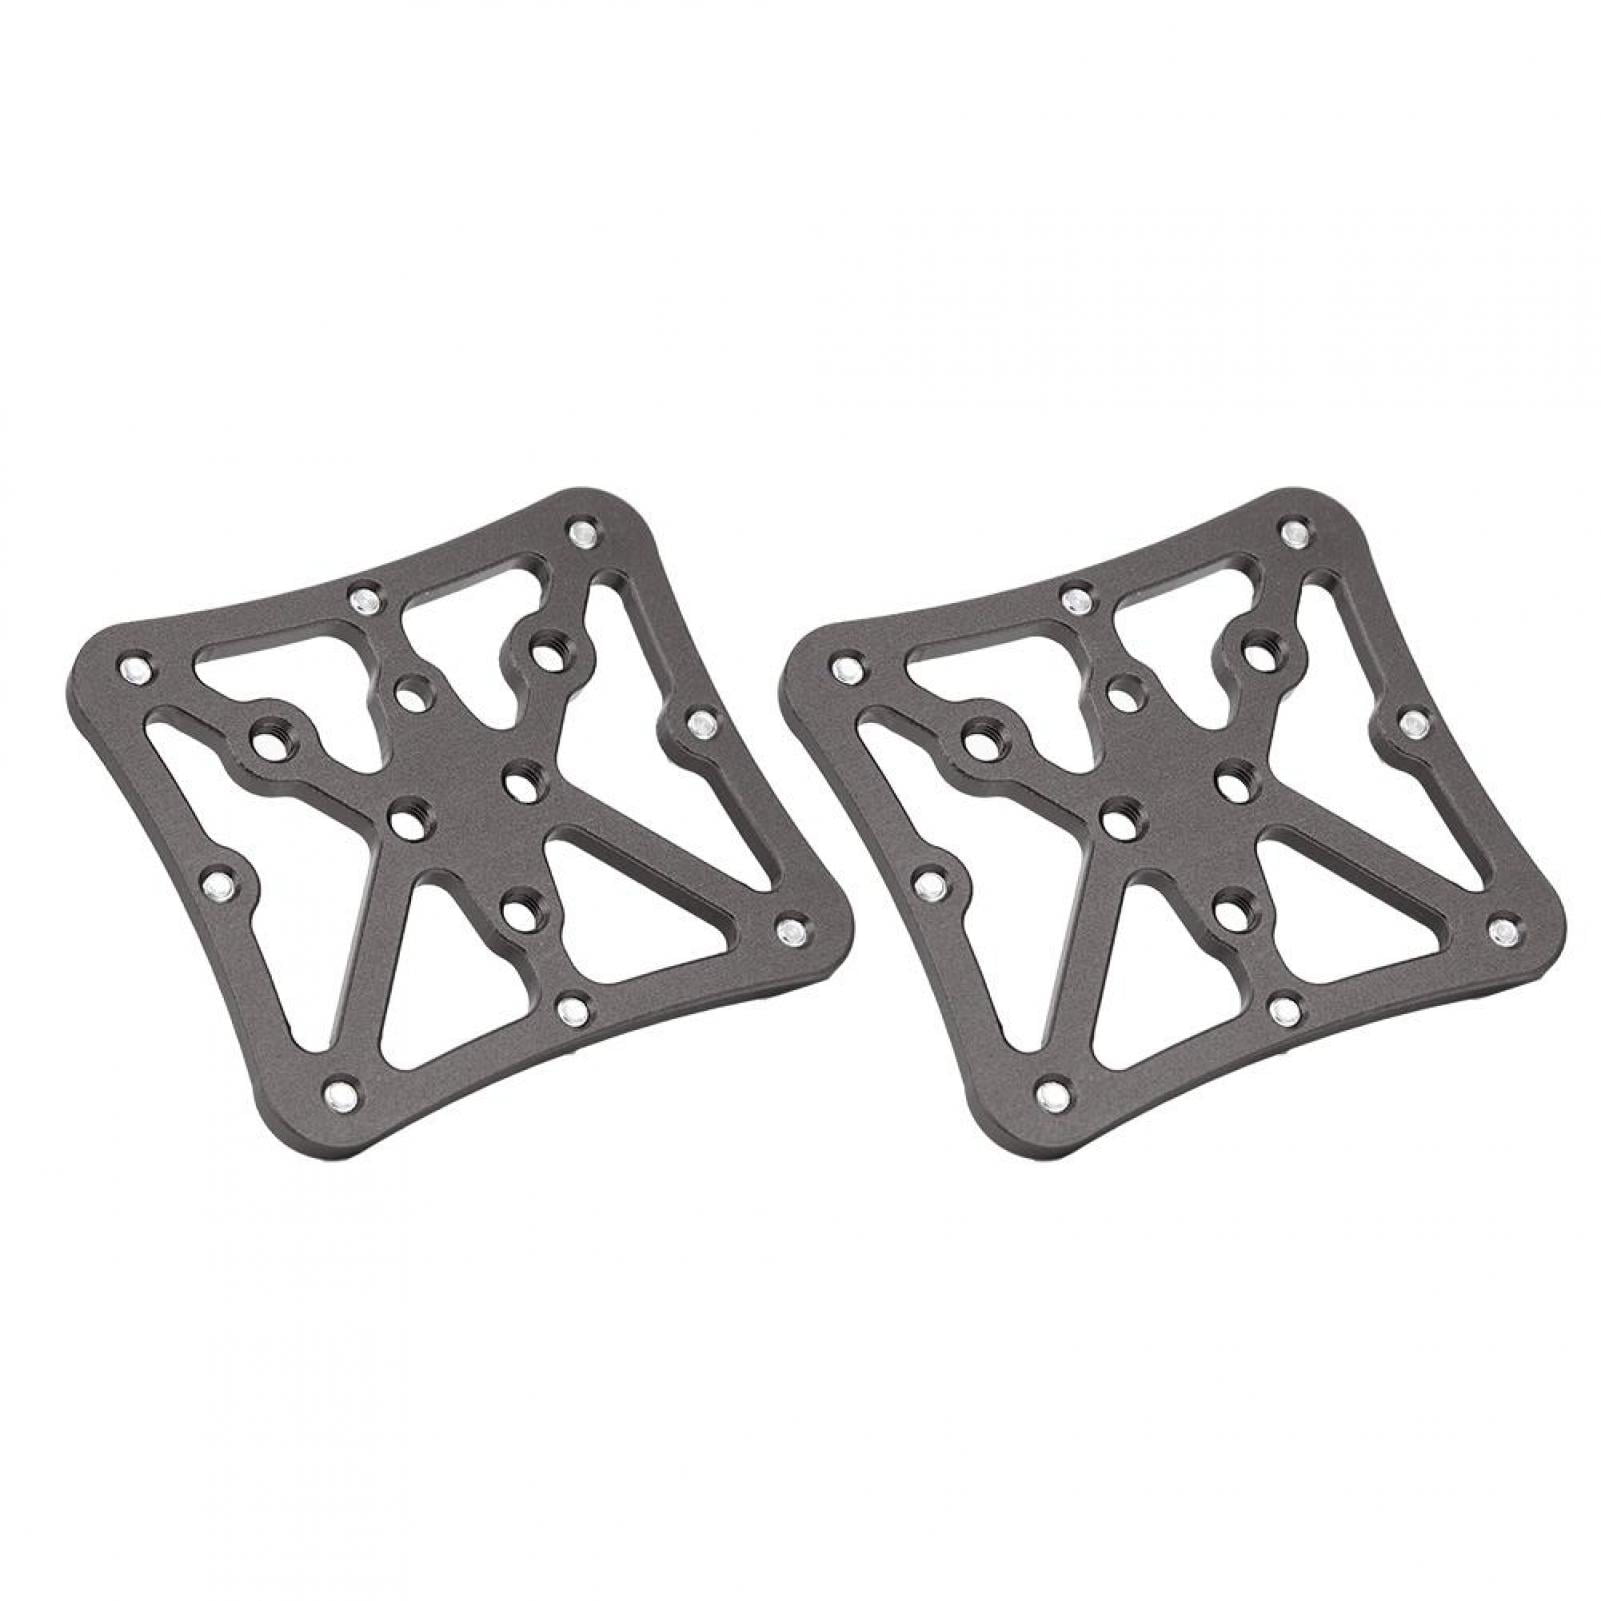 Details about   New MTB Cycling Parts Aluminum Alloy Bike Pedal Adapter Platform Clipless Pedals 